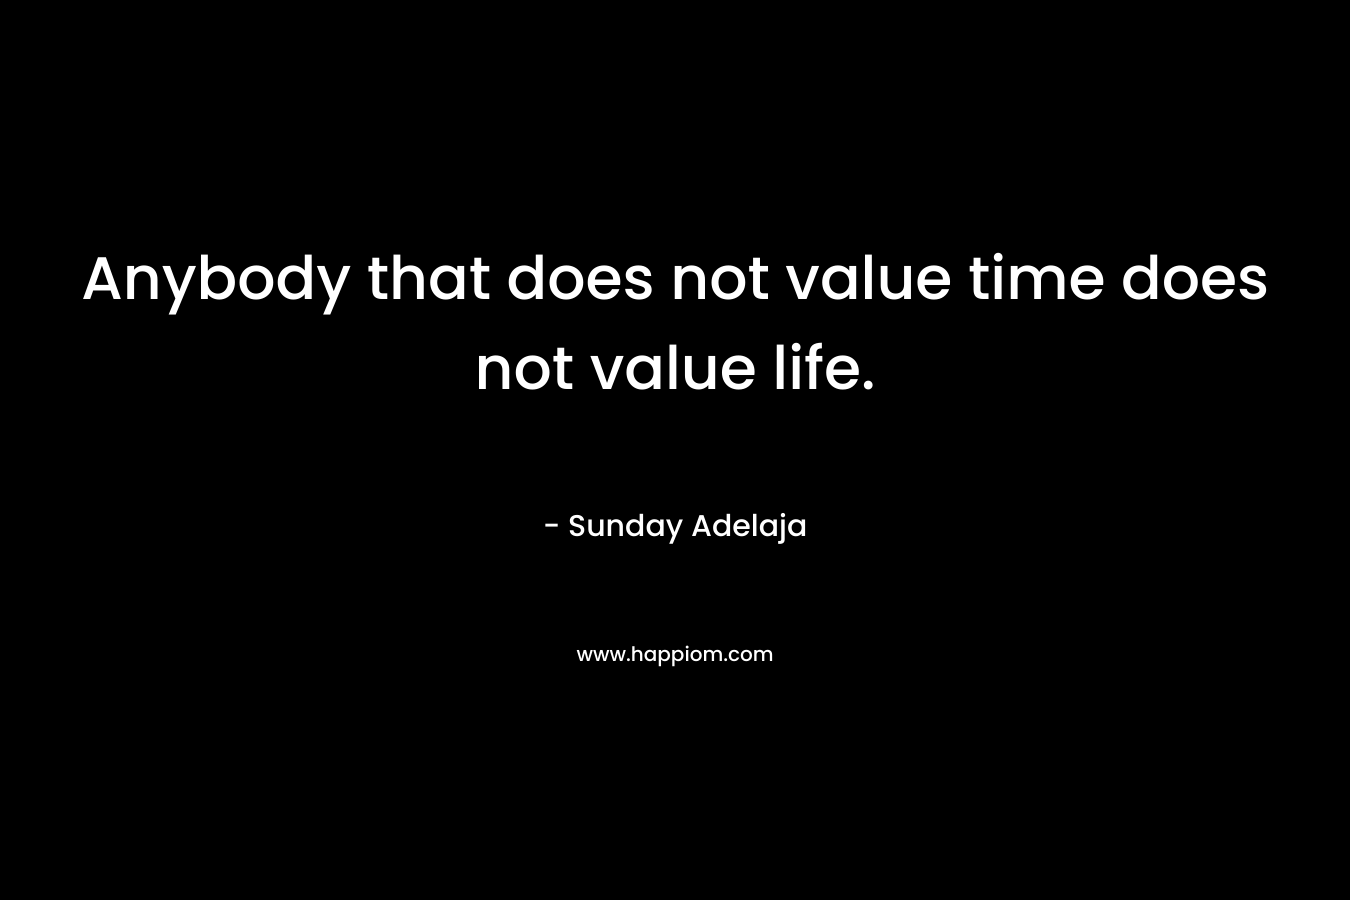 Anybody that does not value time does not value life.